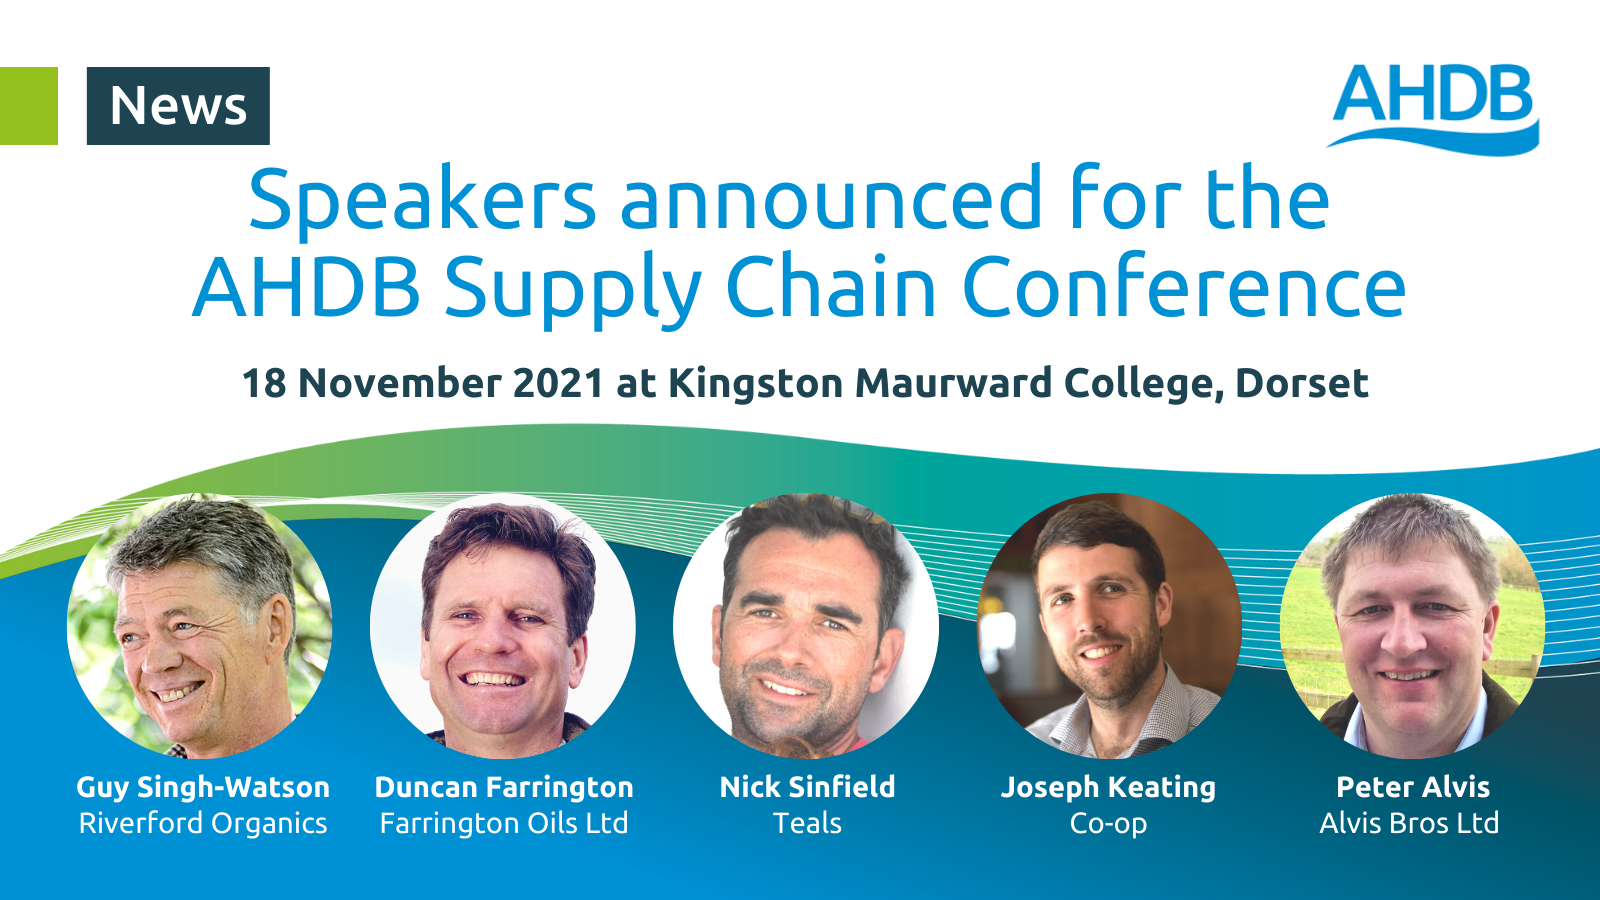 Speakers at the supply chain conference